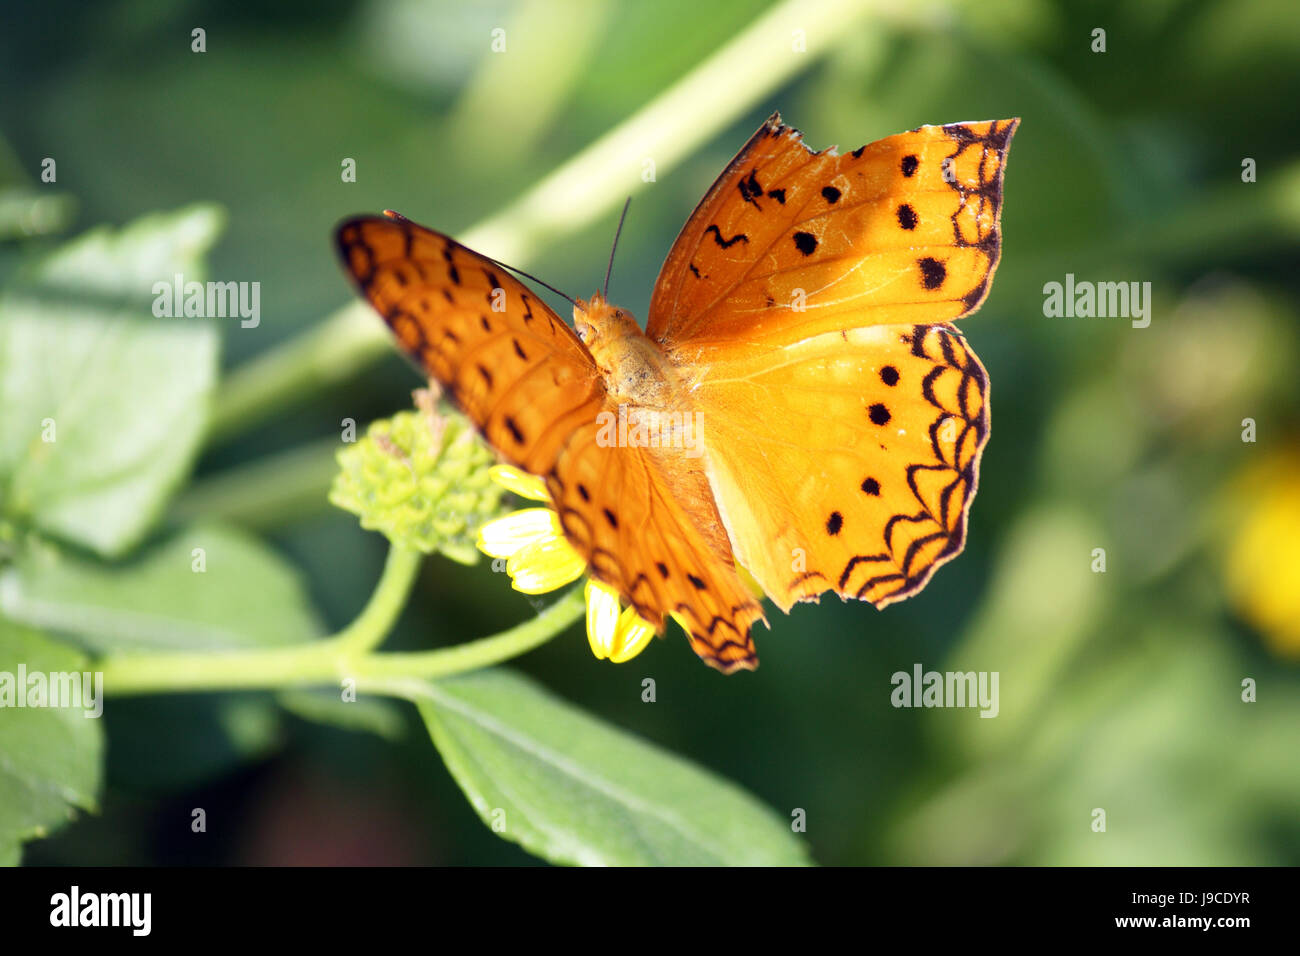 insect, flower, plant, butterfly, spring, pollen, petal, travel, detail, Stock Photo